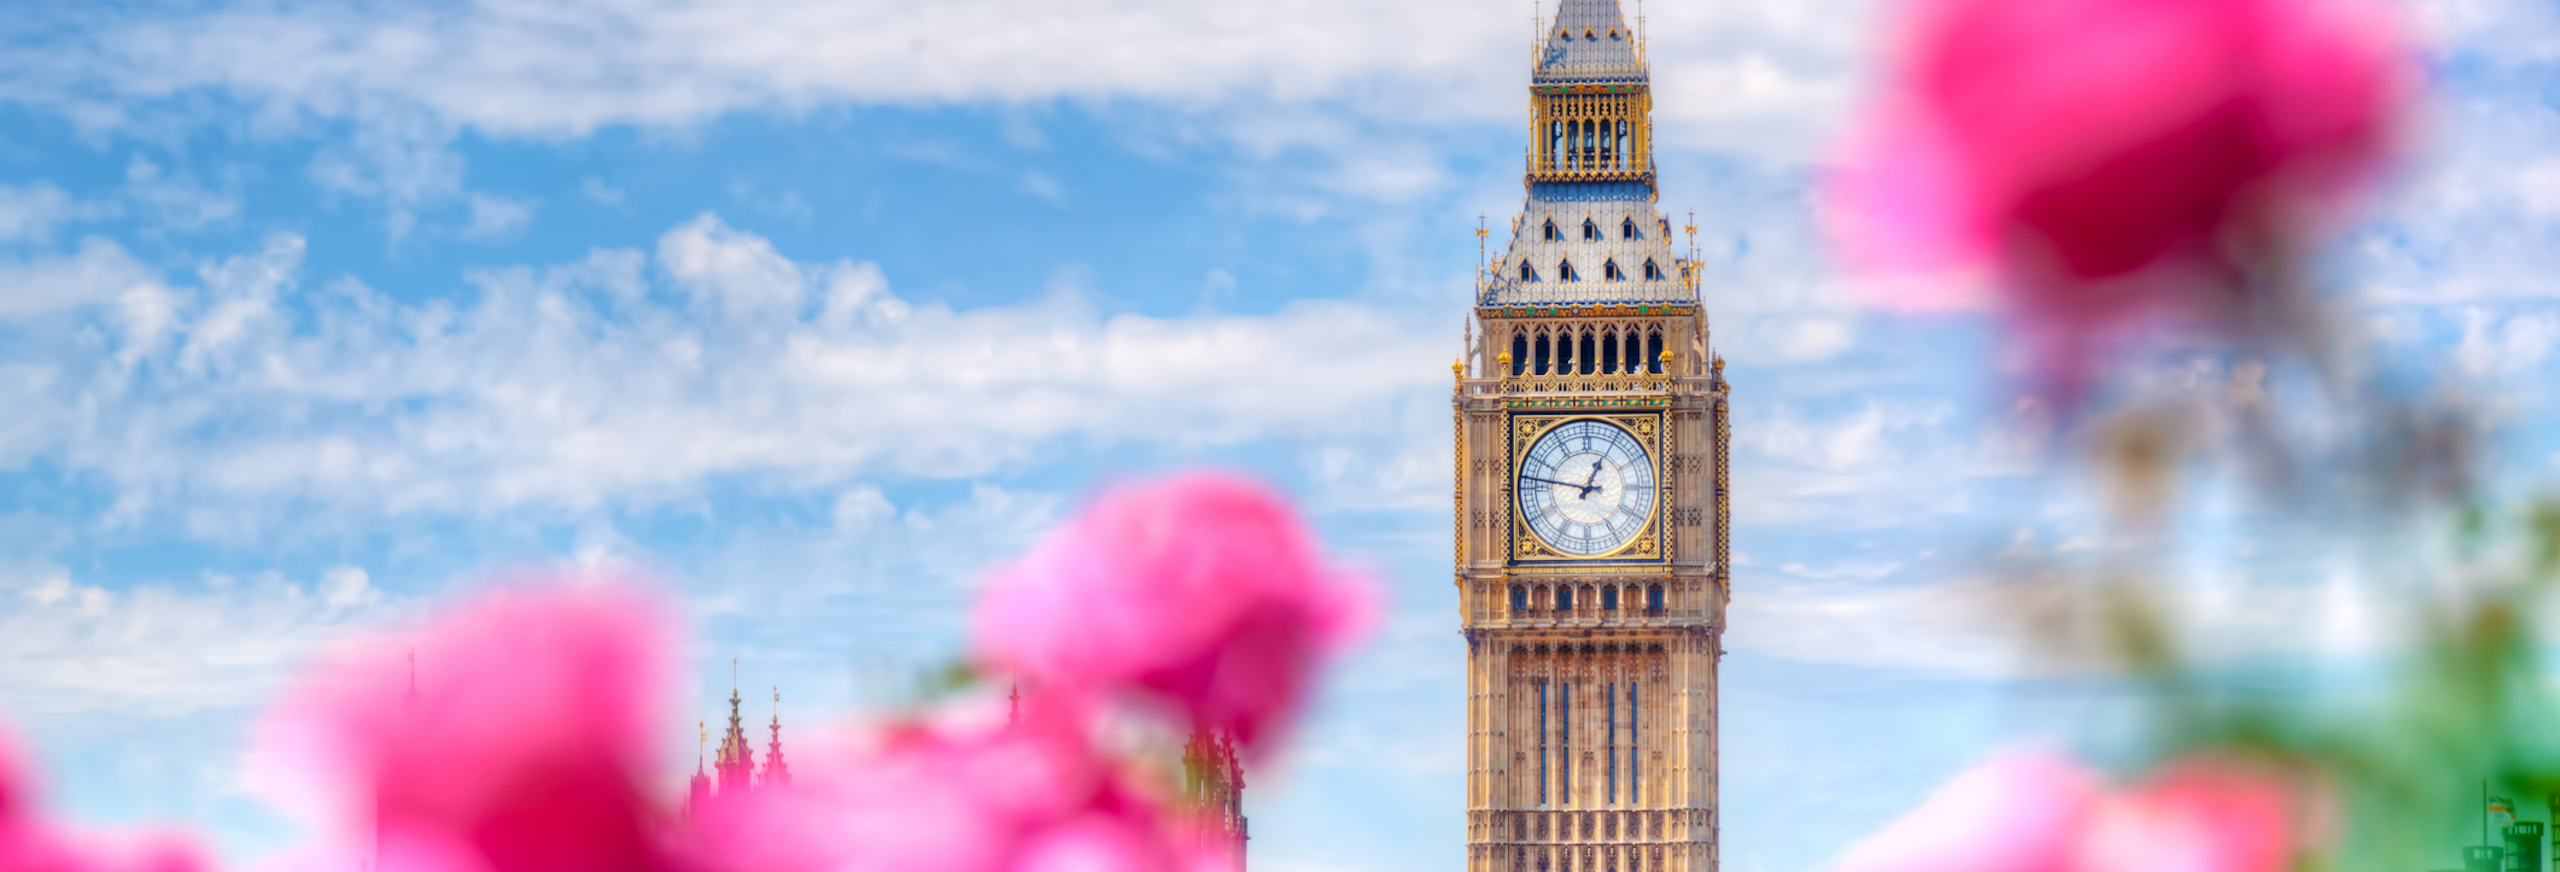 London big ben in the spring time